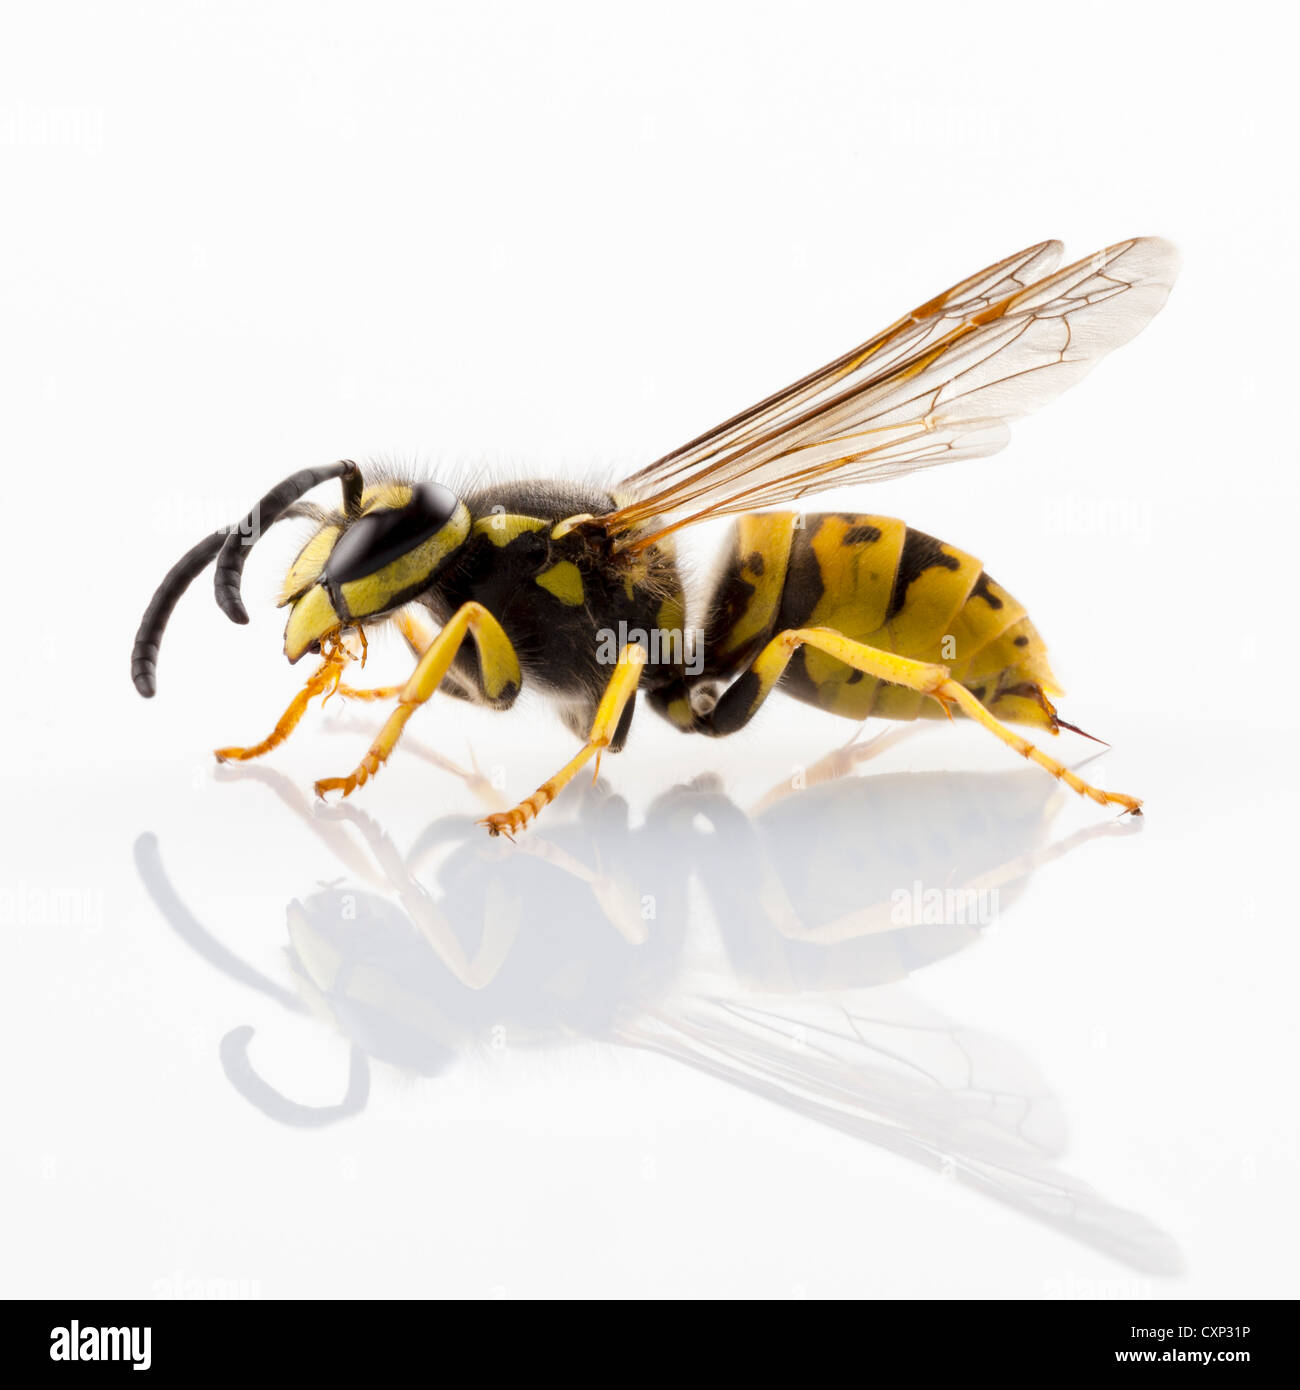 wasp Vespula germanica species isolated on white background Stock Photo